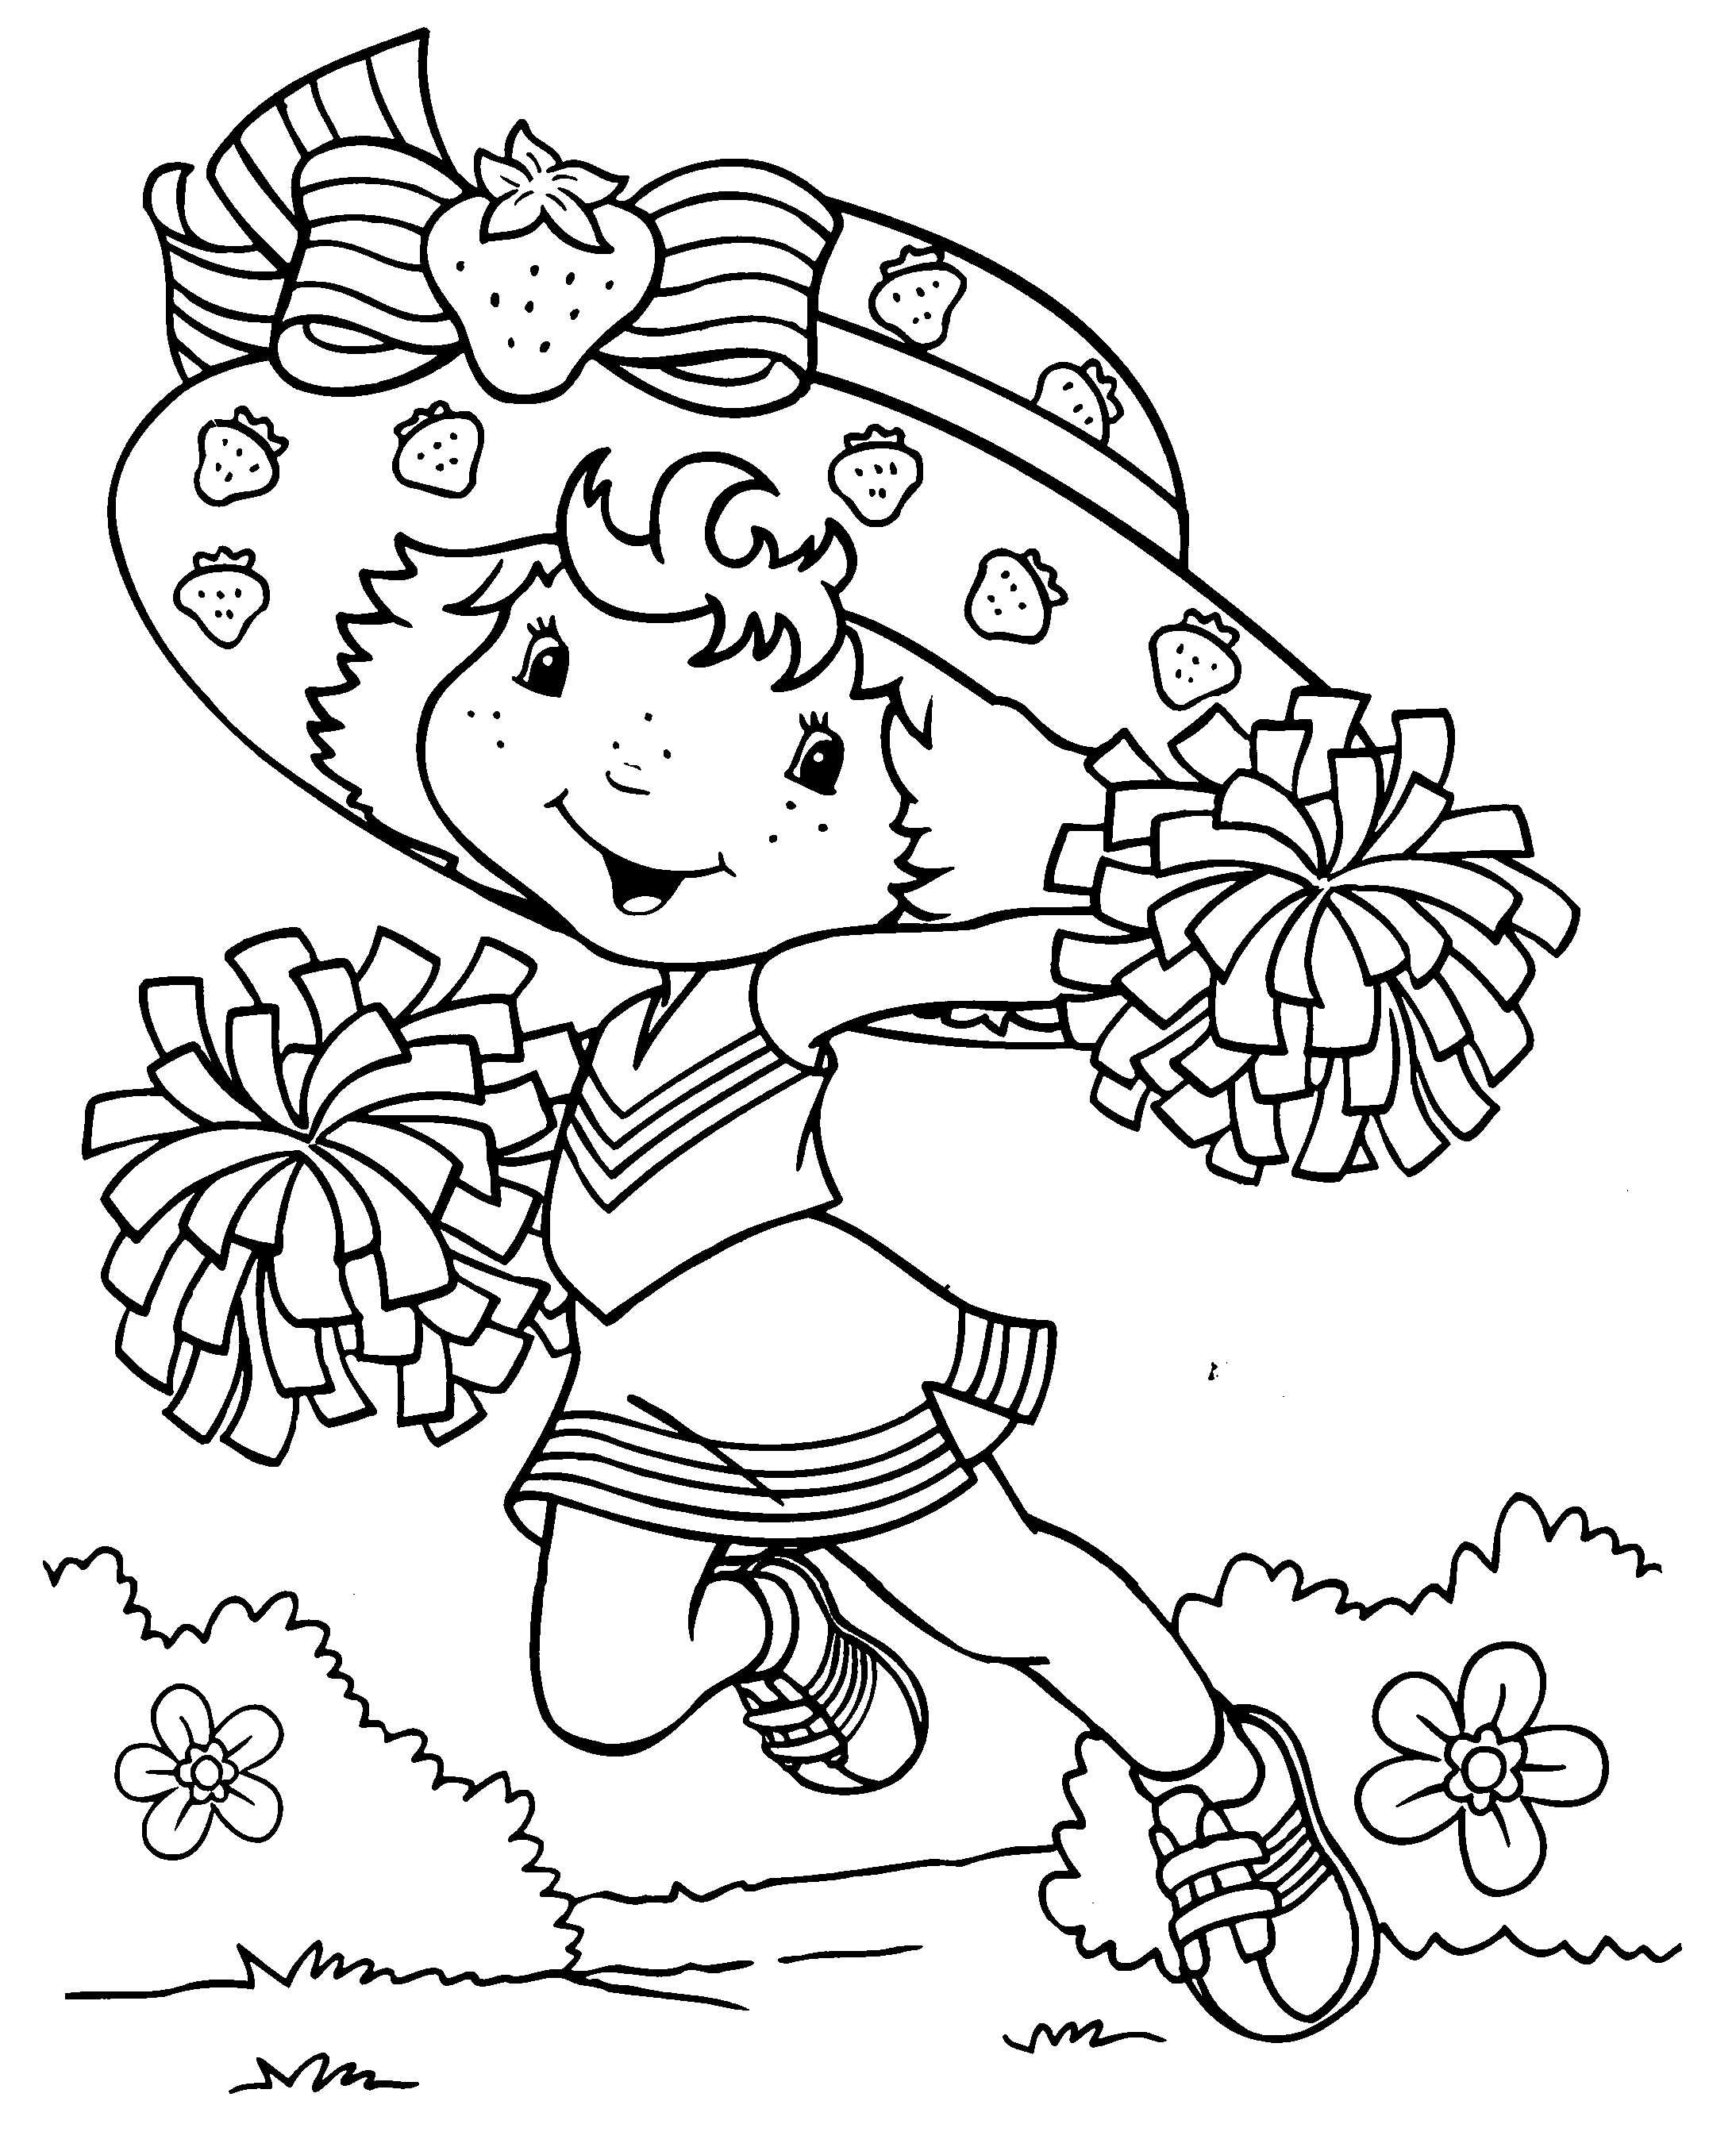 new strawberry shortcake coloring pages printable free printable strawberry shortcake coloring pages for kids new coloring pages printable shortcake strawberry 